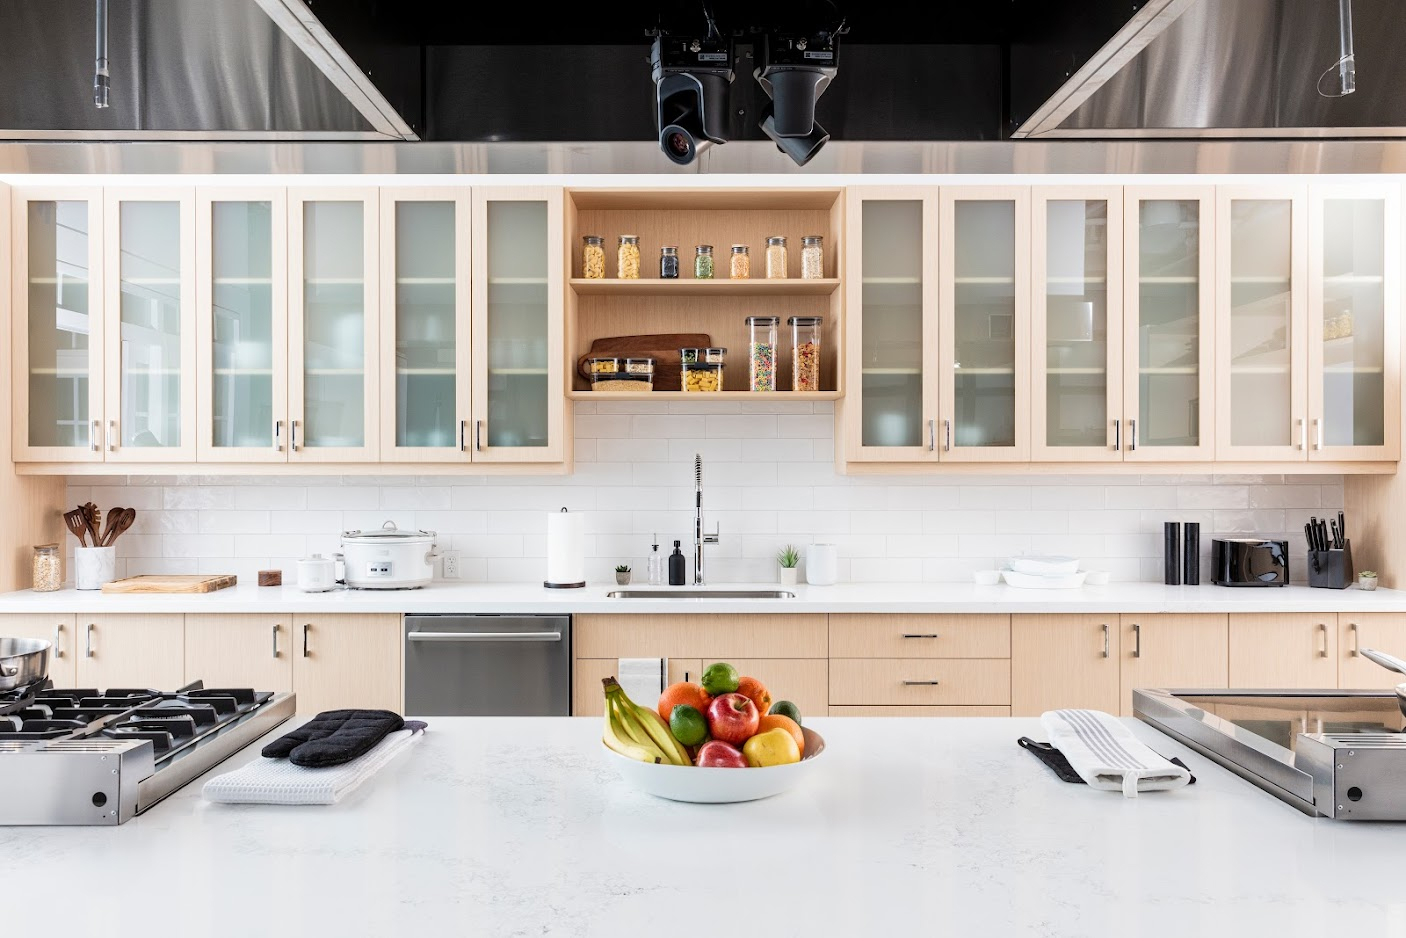 The Newell Creative Kitchen is a versatile kitchen space designed to connect people with the latest food and kitchen trends and serve as a hub for content creation and inspiration.